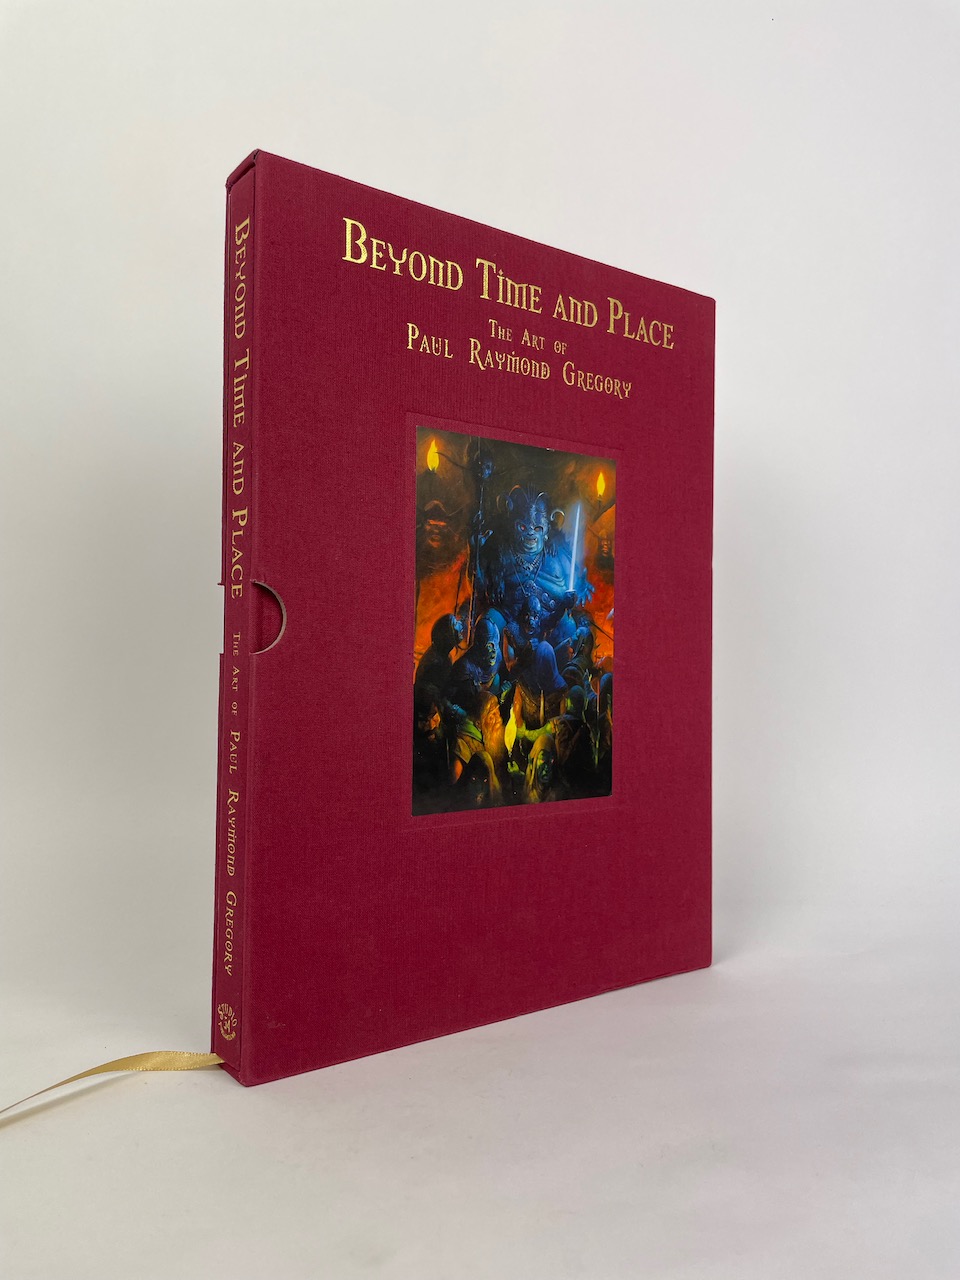 Beyond Time and Place The Art of Paul Raymond Gregory - Limited Edition Book 2